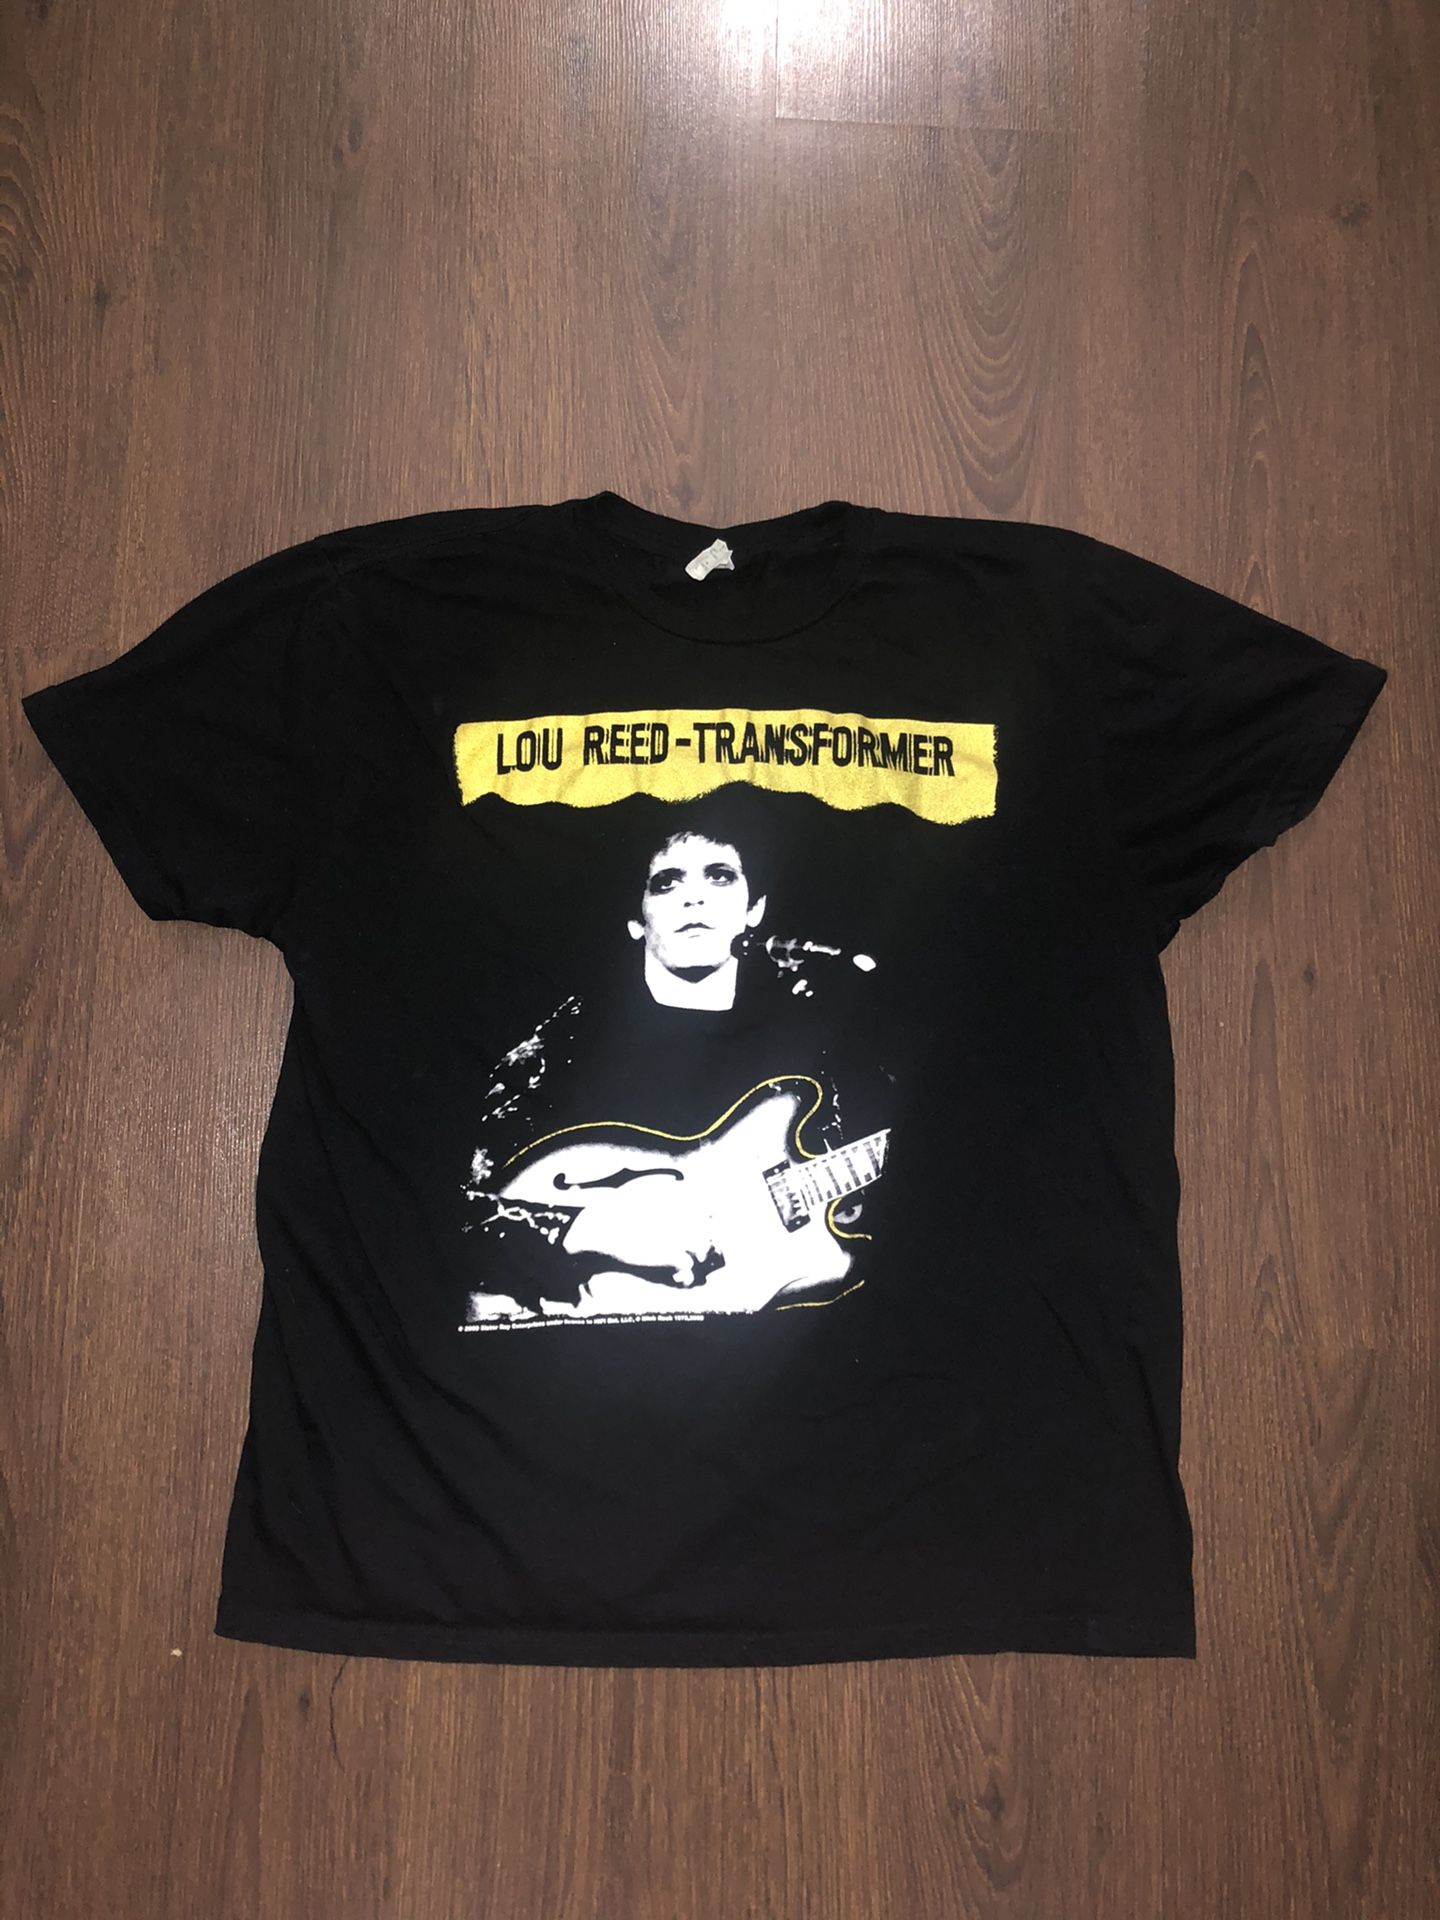 Lou Reed Transformer Adult XL 2009 T-shirt! Soft and Light Weight! Excellent Condition. The Velvet Underground